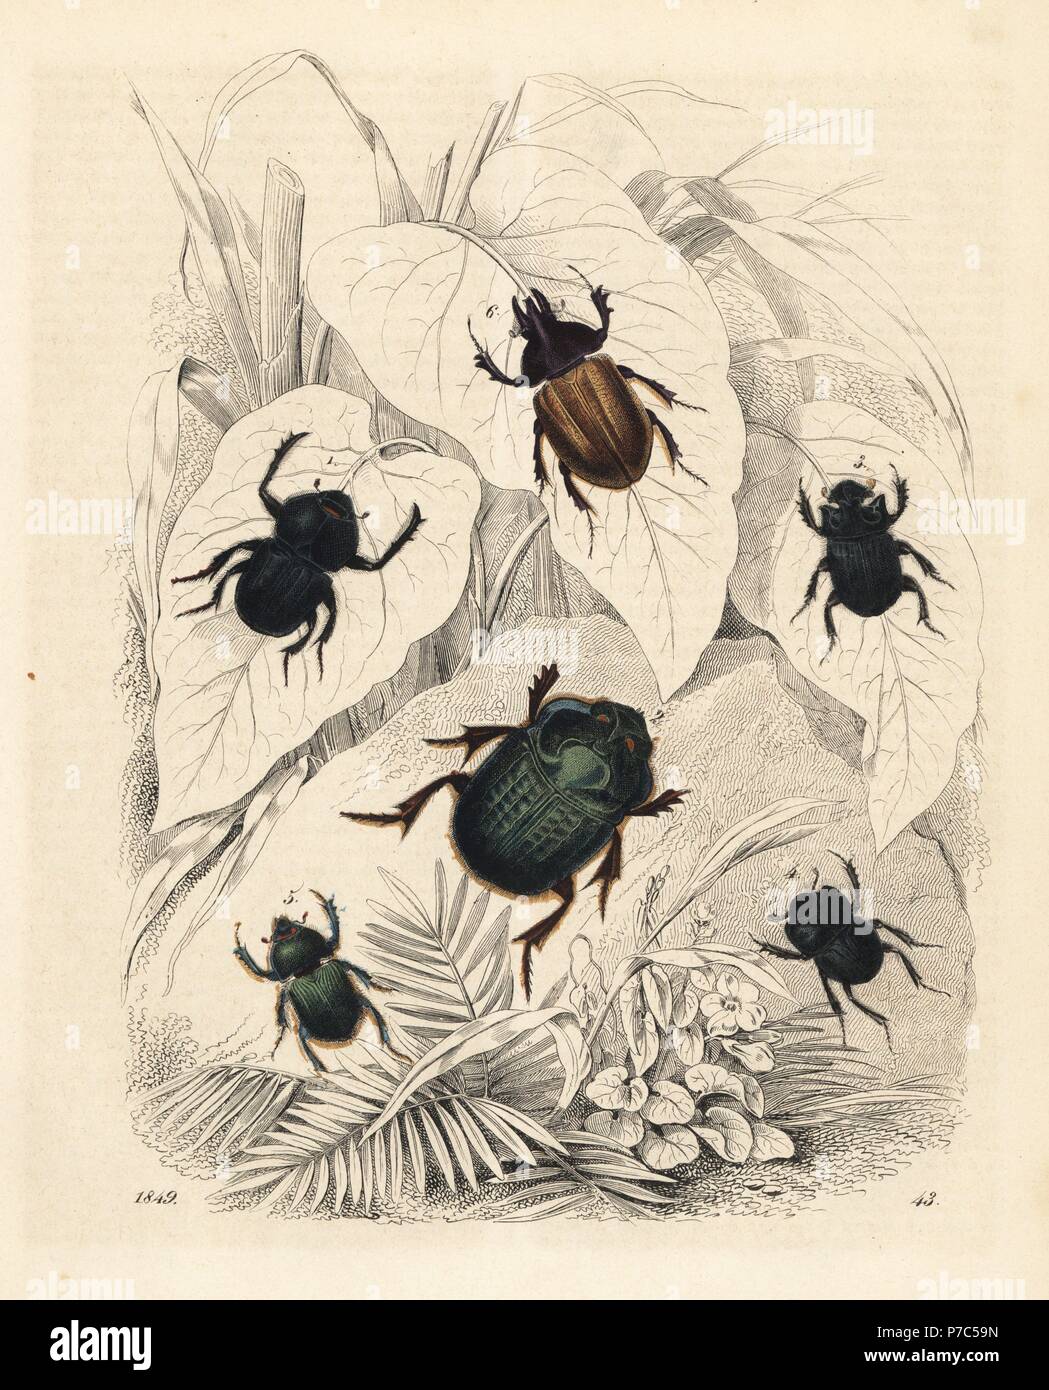 Scarab and dung beetles: Onitis belial 1, Phanaeus ensifer 2, Copris lunaris 3, Lethrus cephalotes 4, Geotrupes stercorarius 5, and Agaocephala latreillii 6. Handcoloured lithograph from Carl Hoffmann's Book of the World, Stuttgart, 1849. Stock Photo